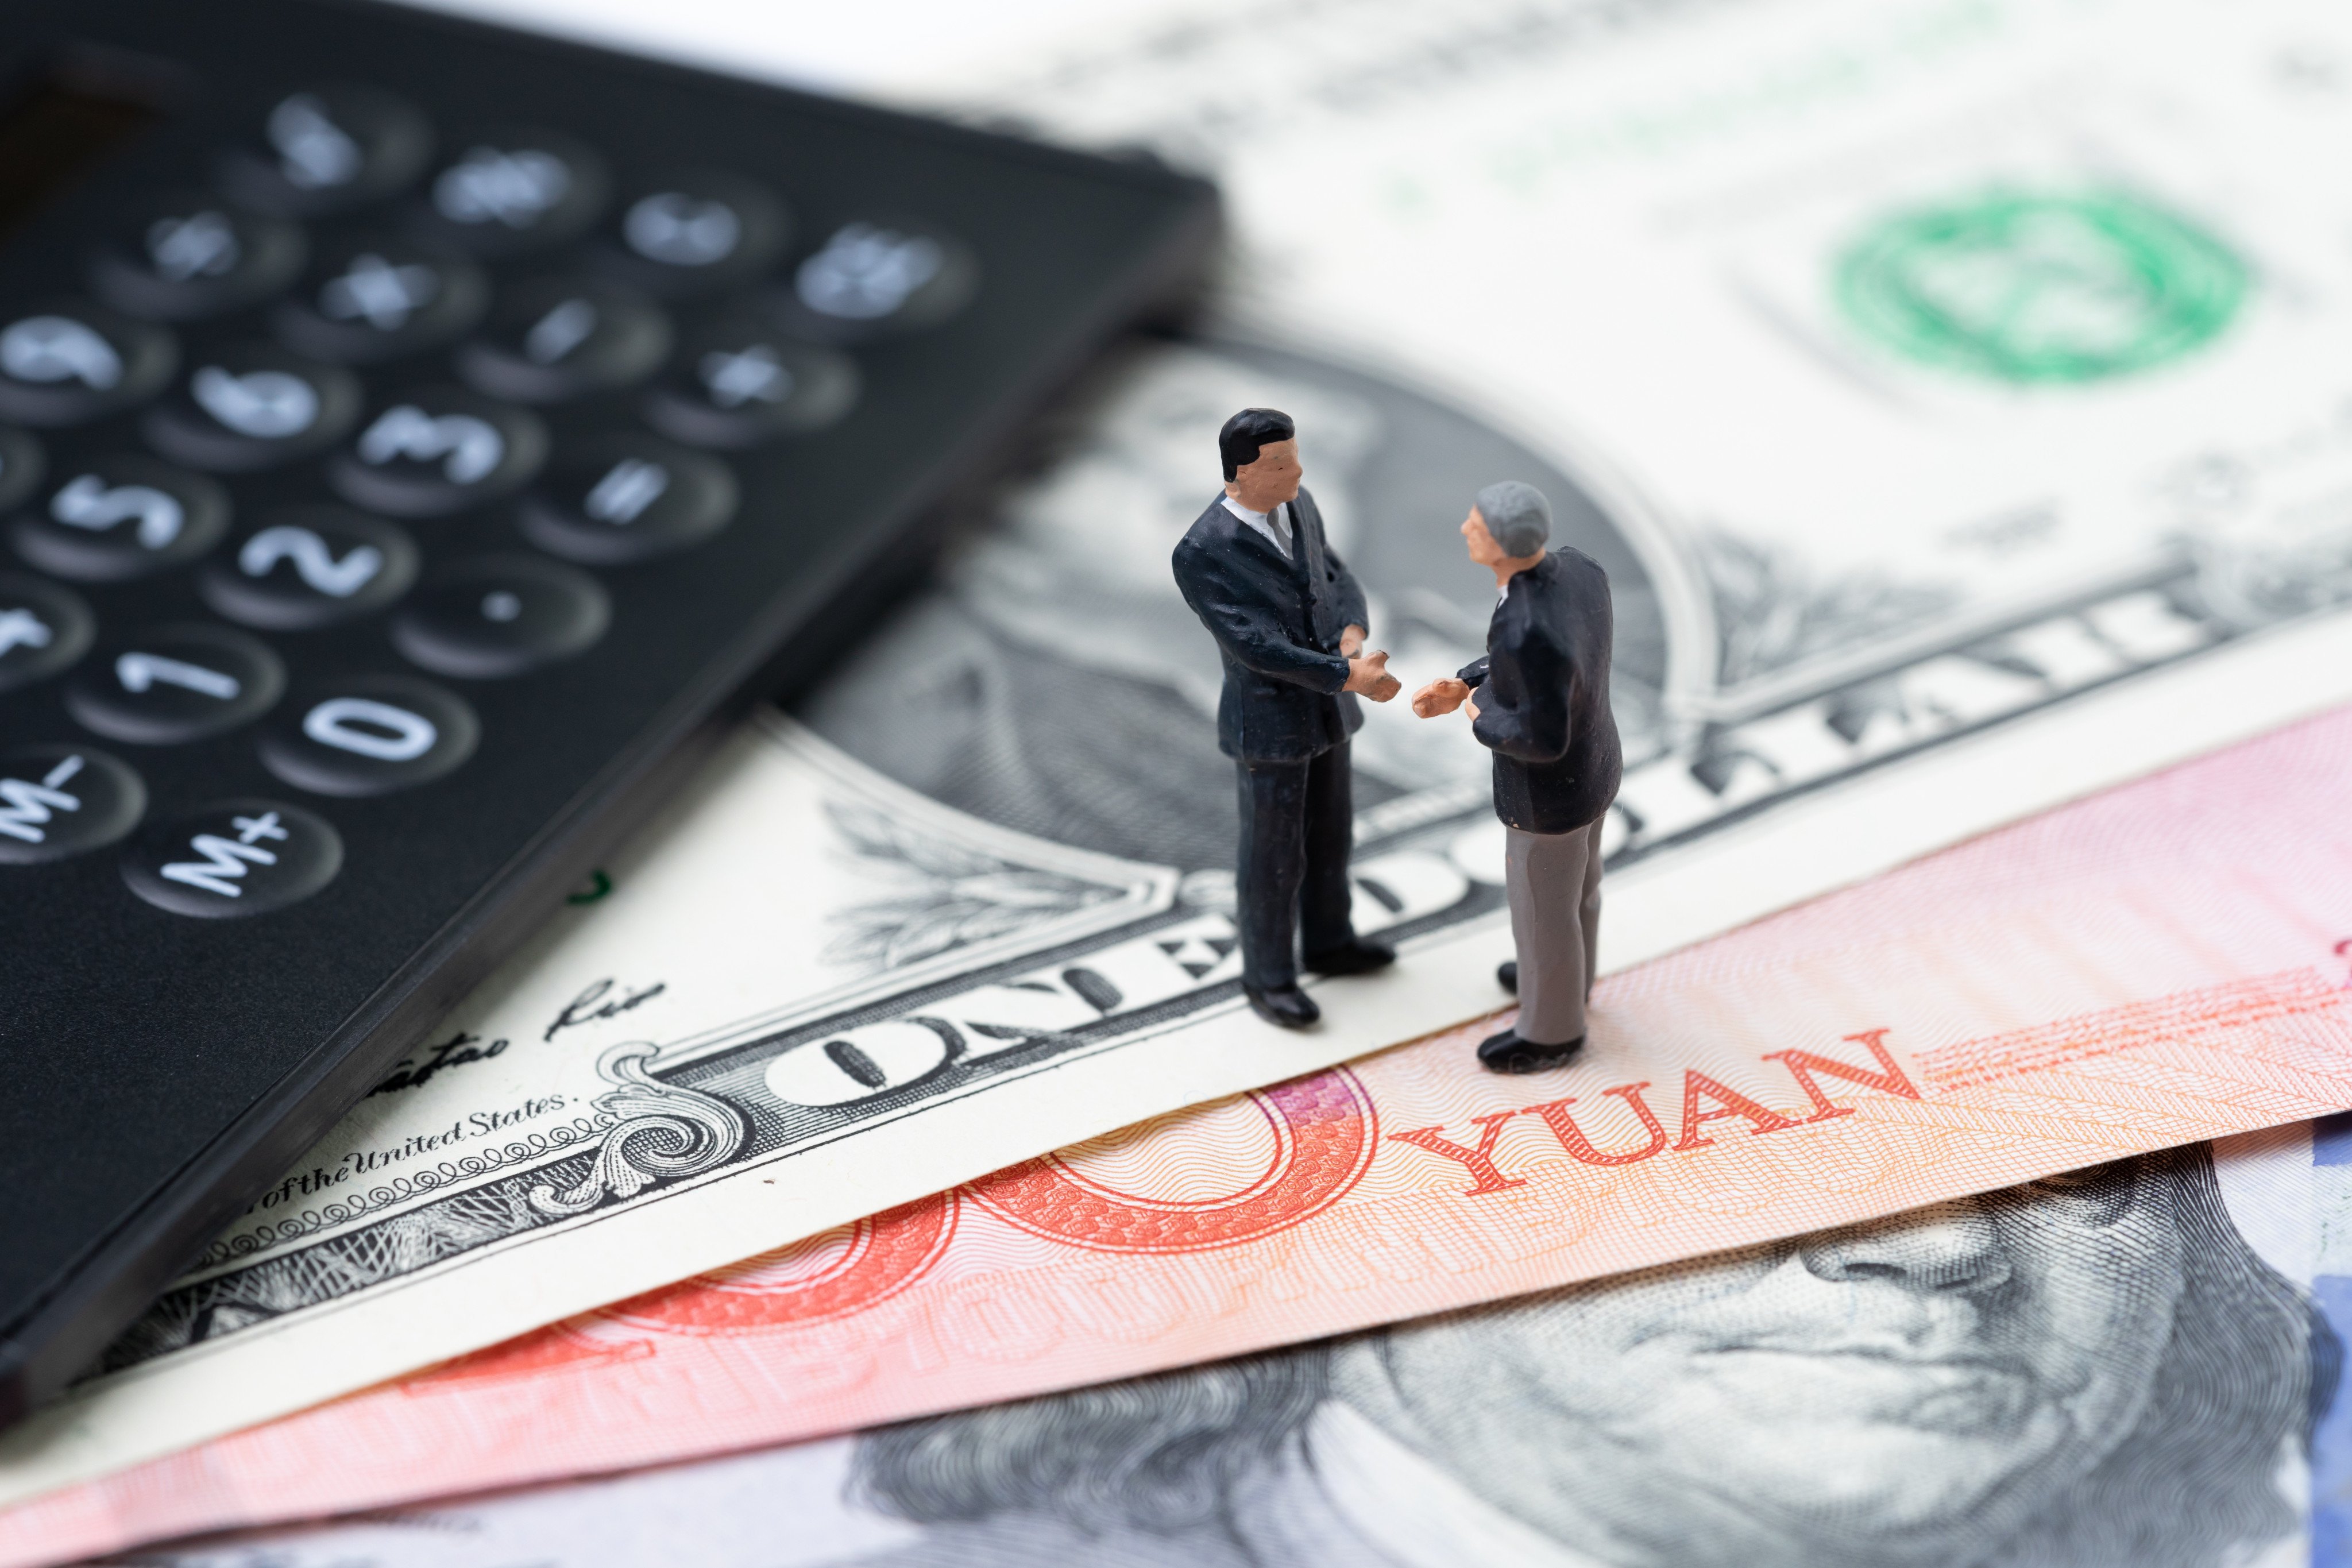 If the yuan continues to strengthen against the US dollar, it will also make some of China’s exports less competitive. Photo: Shutterstock